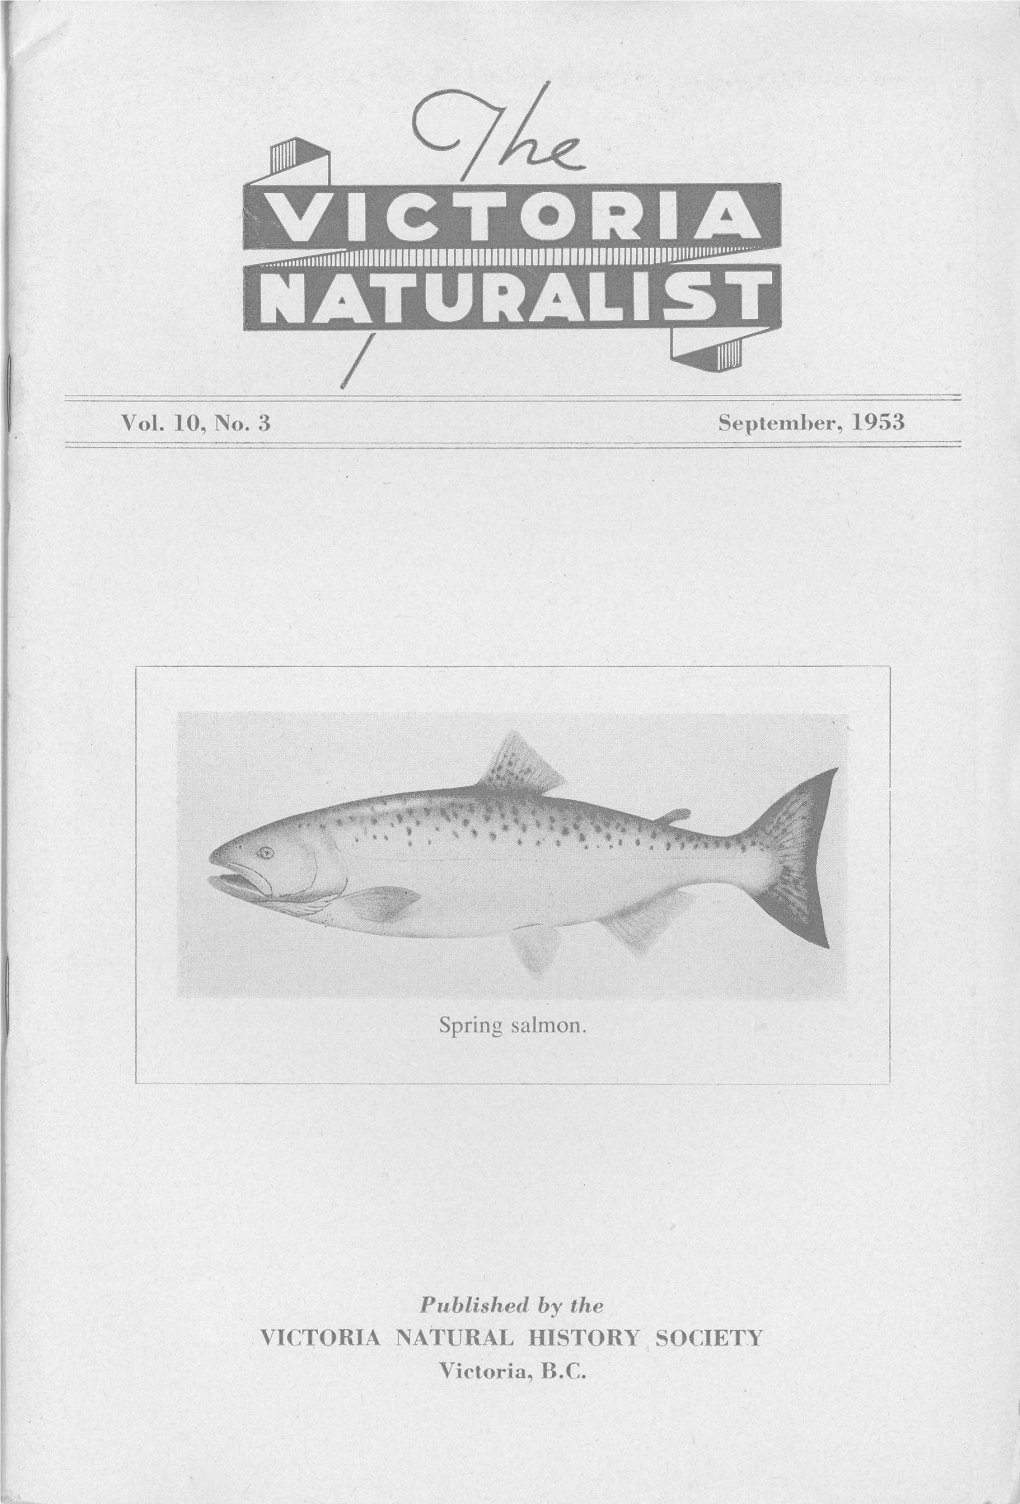 VICTORIA NATURAL HISTORY SOCIETY Victoria, B.C. 25 the VICTORIA NAT II R a LIST Published by - the VICTORIA NATURAL HISTORY SOCIETY Vol,10,No.3 September, 1953